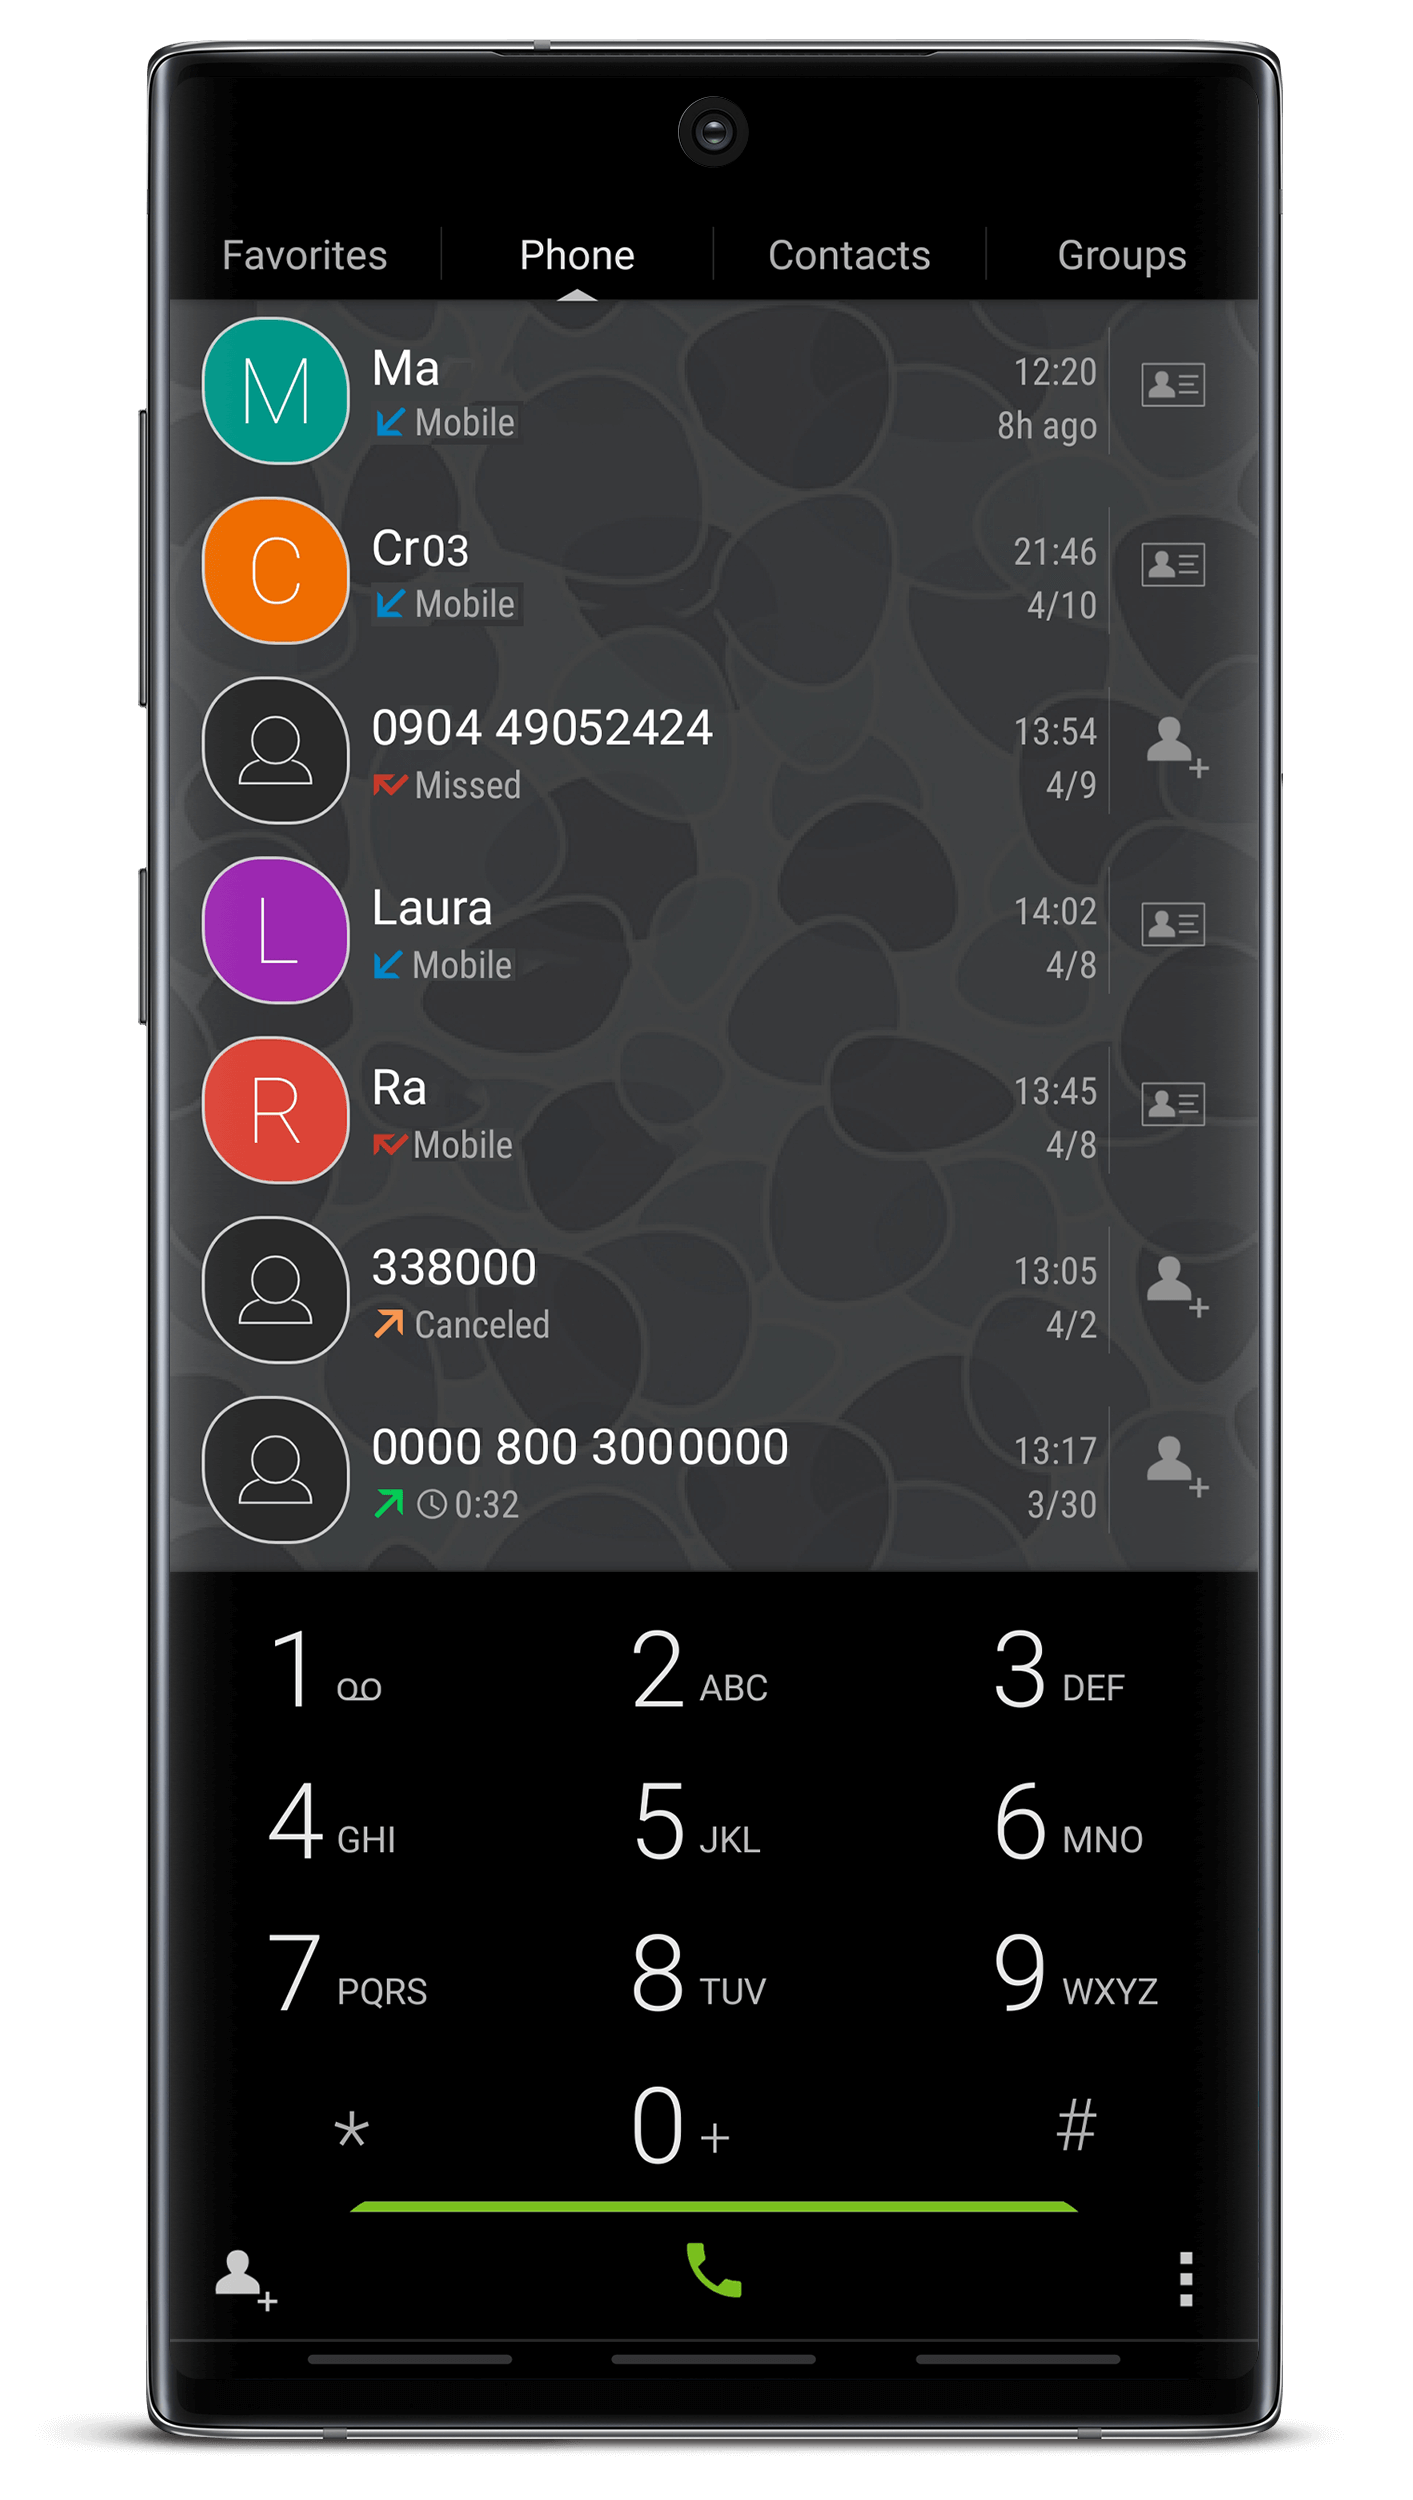 phone dialer app using other contact